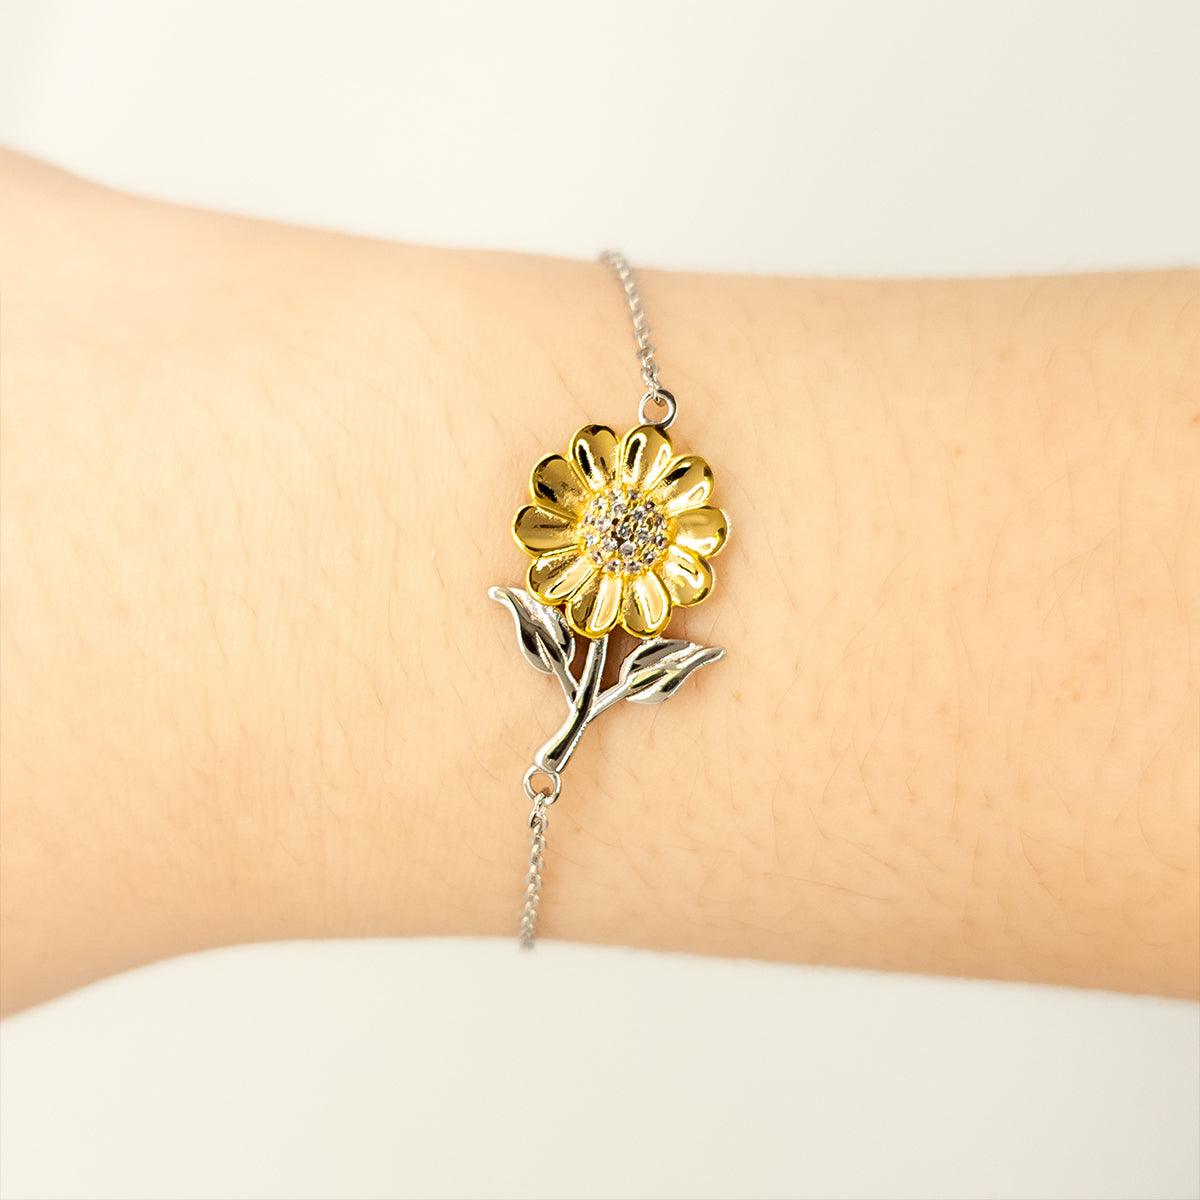 Director Sunflower Bracelet - Thanks for being who you are - Birthday Christmas Jewelry Gifts Coworkers Colleague Boss - Mallard Moon Gift Shop